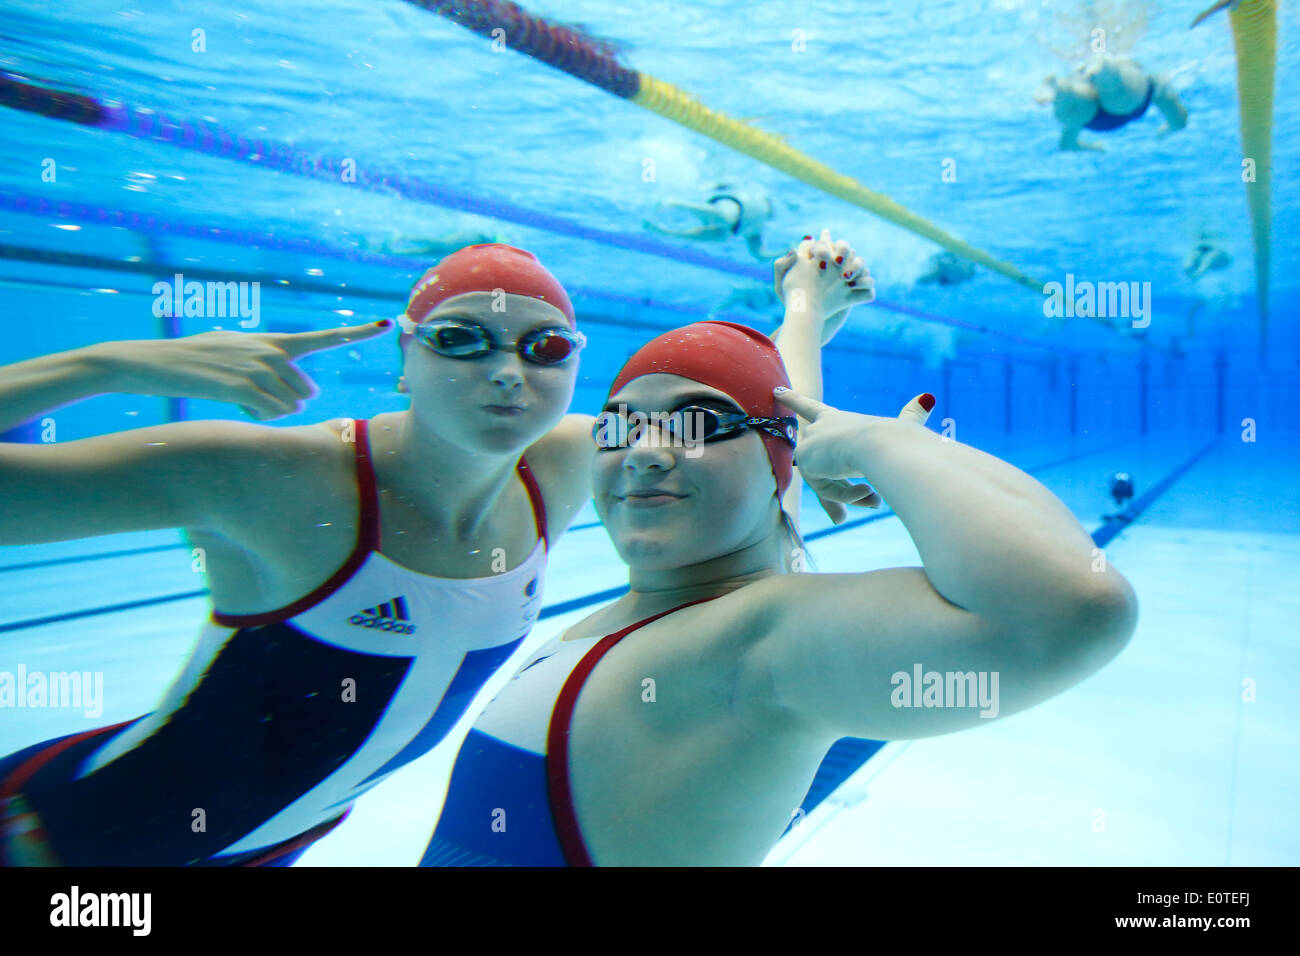 British swimmers pose for a photograph underwater during training at the Aquatics Center during the London 2012 Paralympic Games, London, Britain, 01 September 2012. Stock Photo